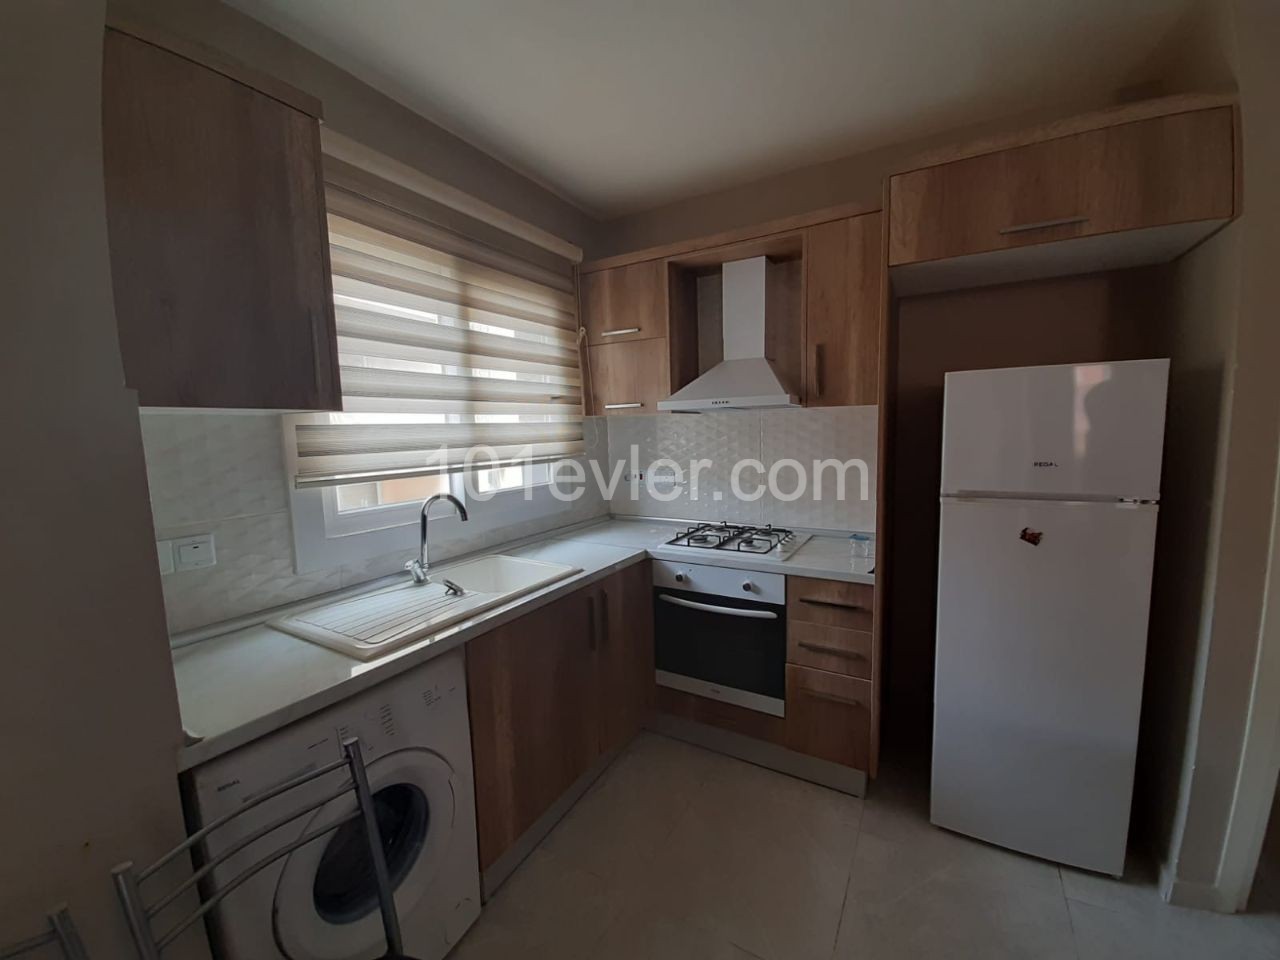 Sakarya 2 + 1 rent house weder Llosa home noch Llosa Apartment 10 months payment 4000 $ Anzahlung 400$ Commission 400$ ** 